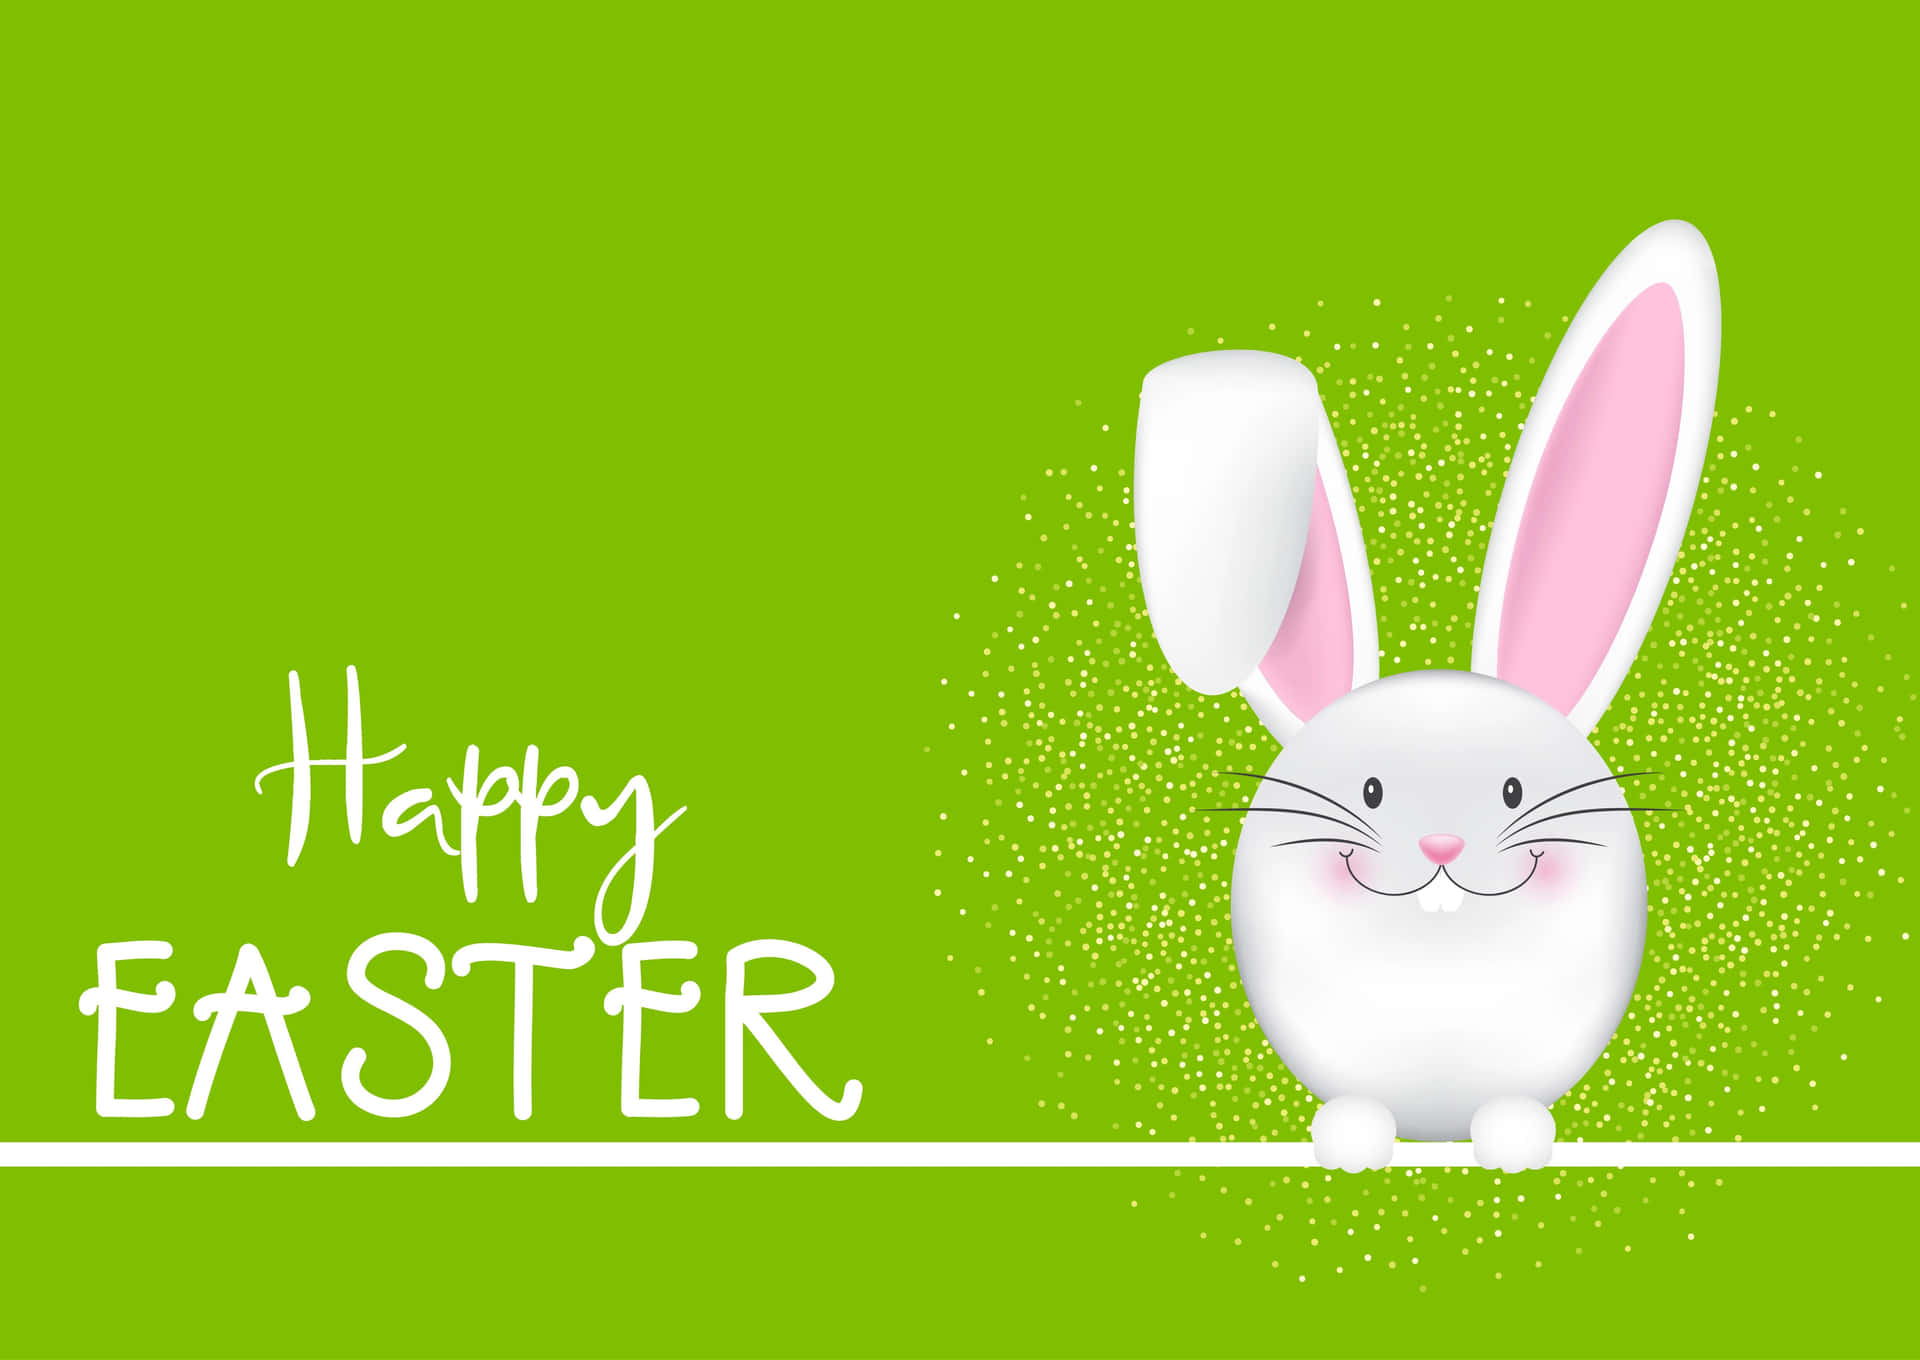 Celebrate this Easter with joy and happiness.